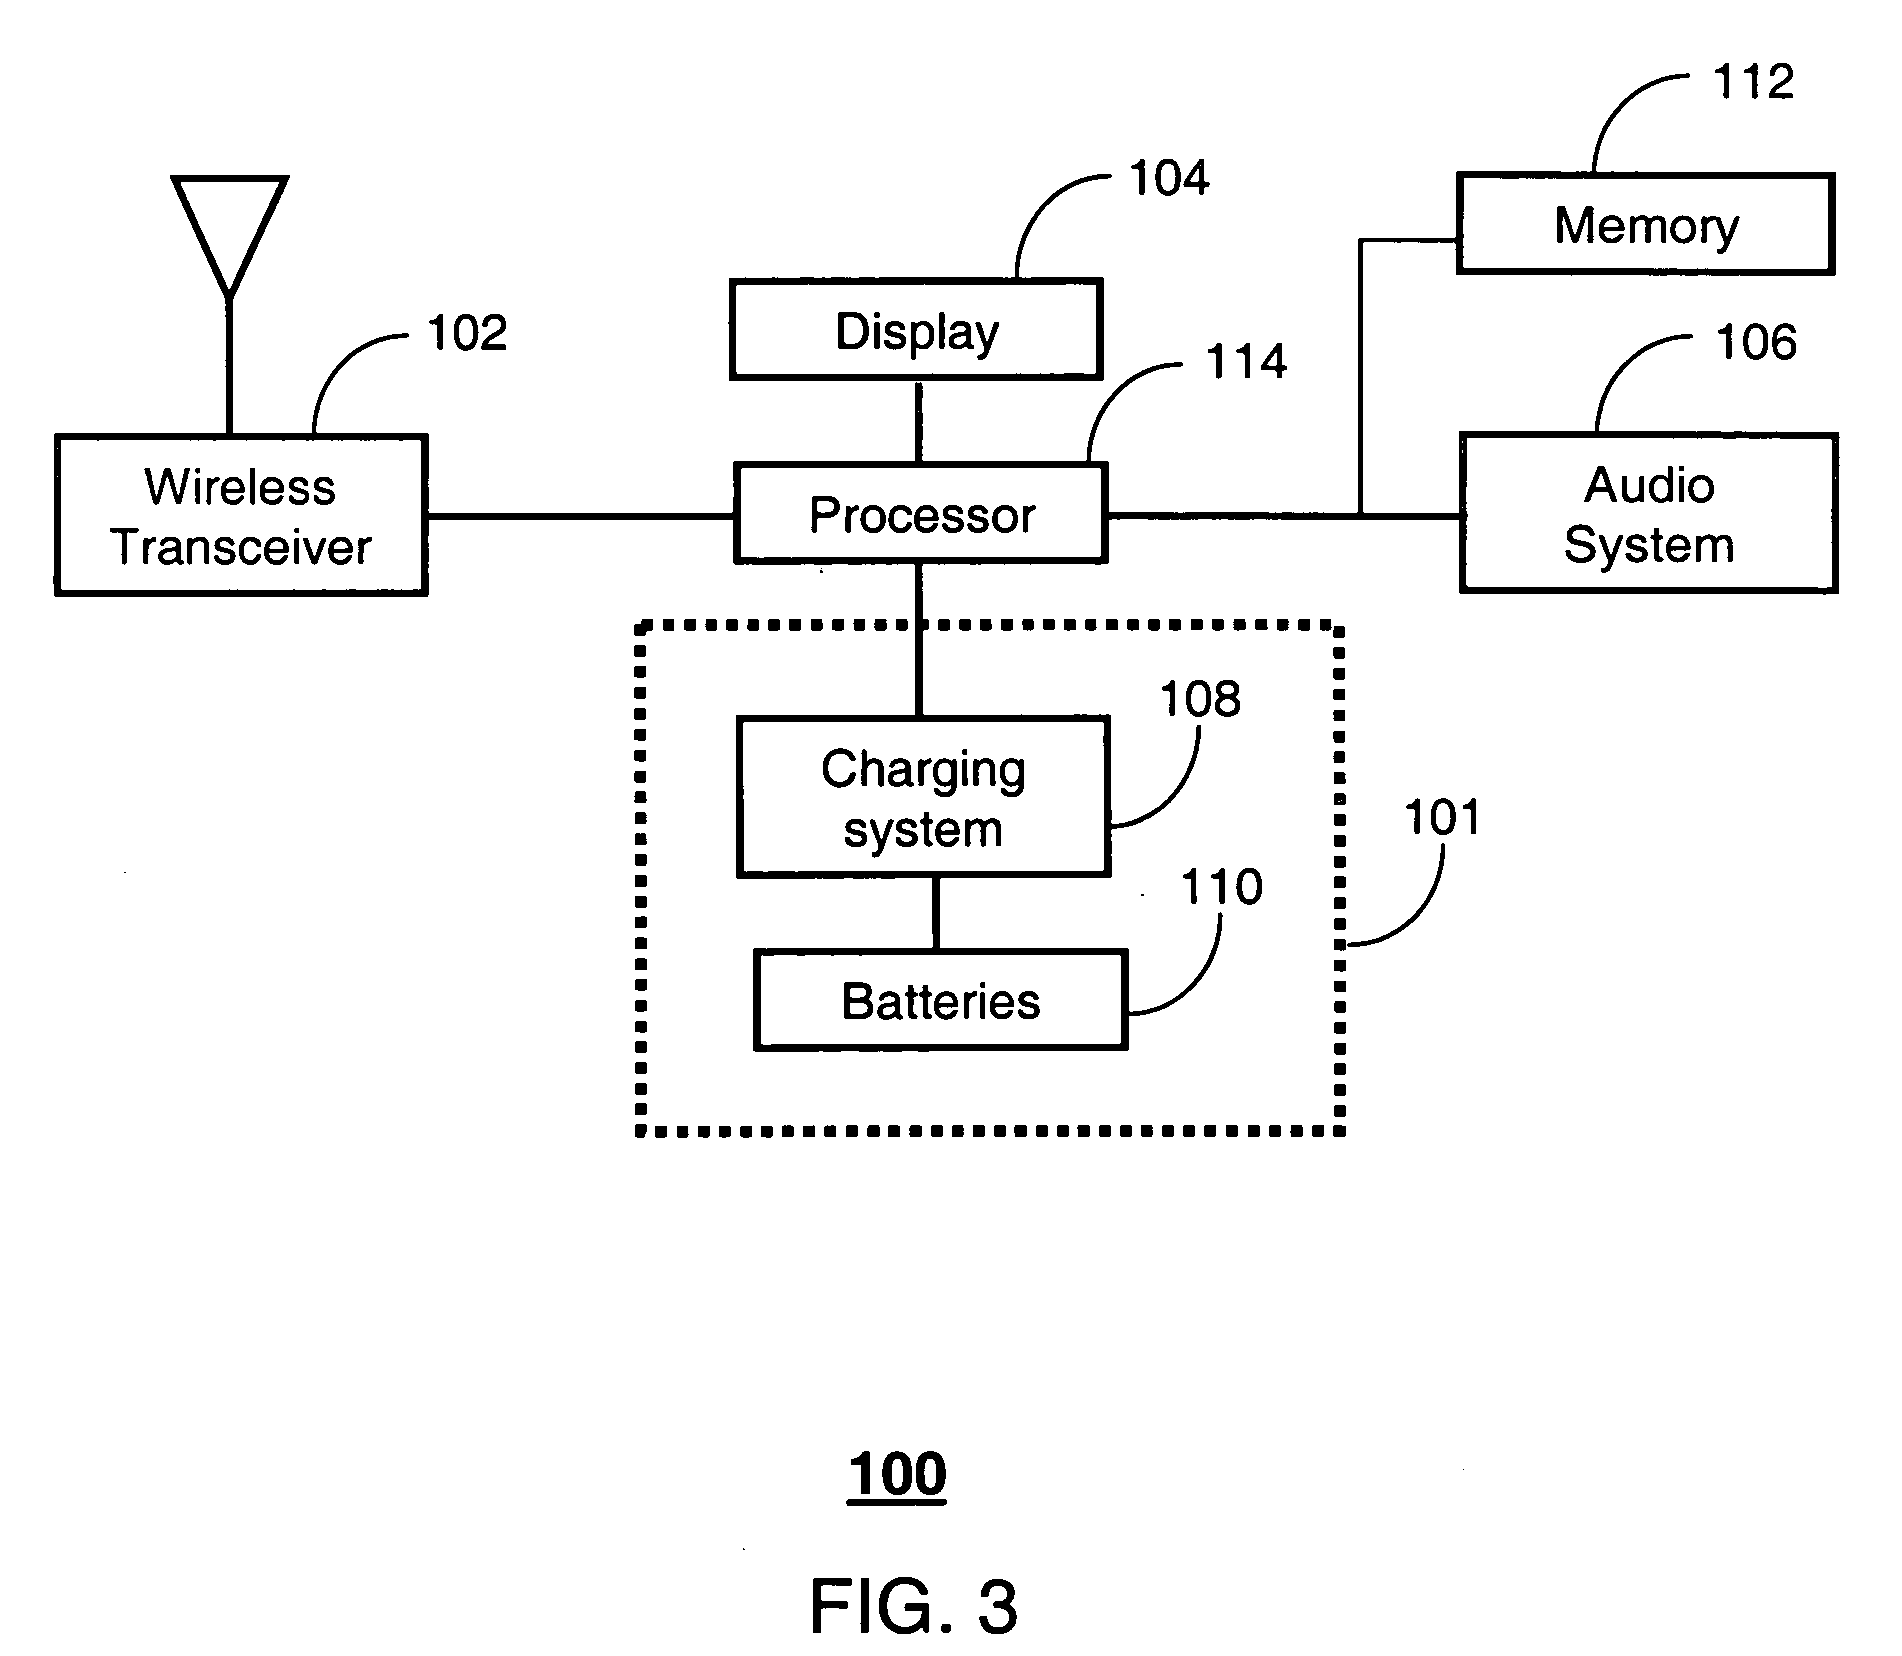 Method and apparatus for improving cycle-life and capacity of a battery pack